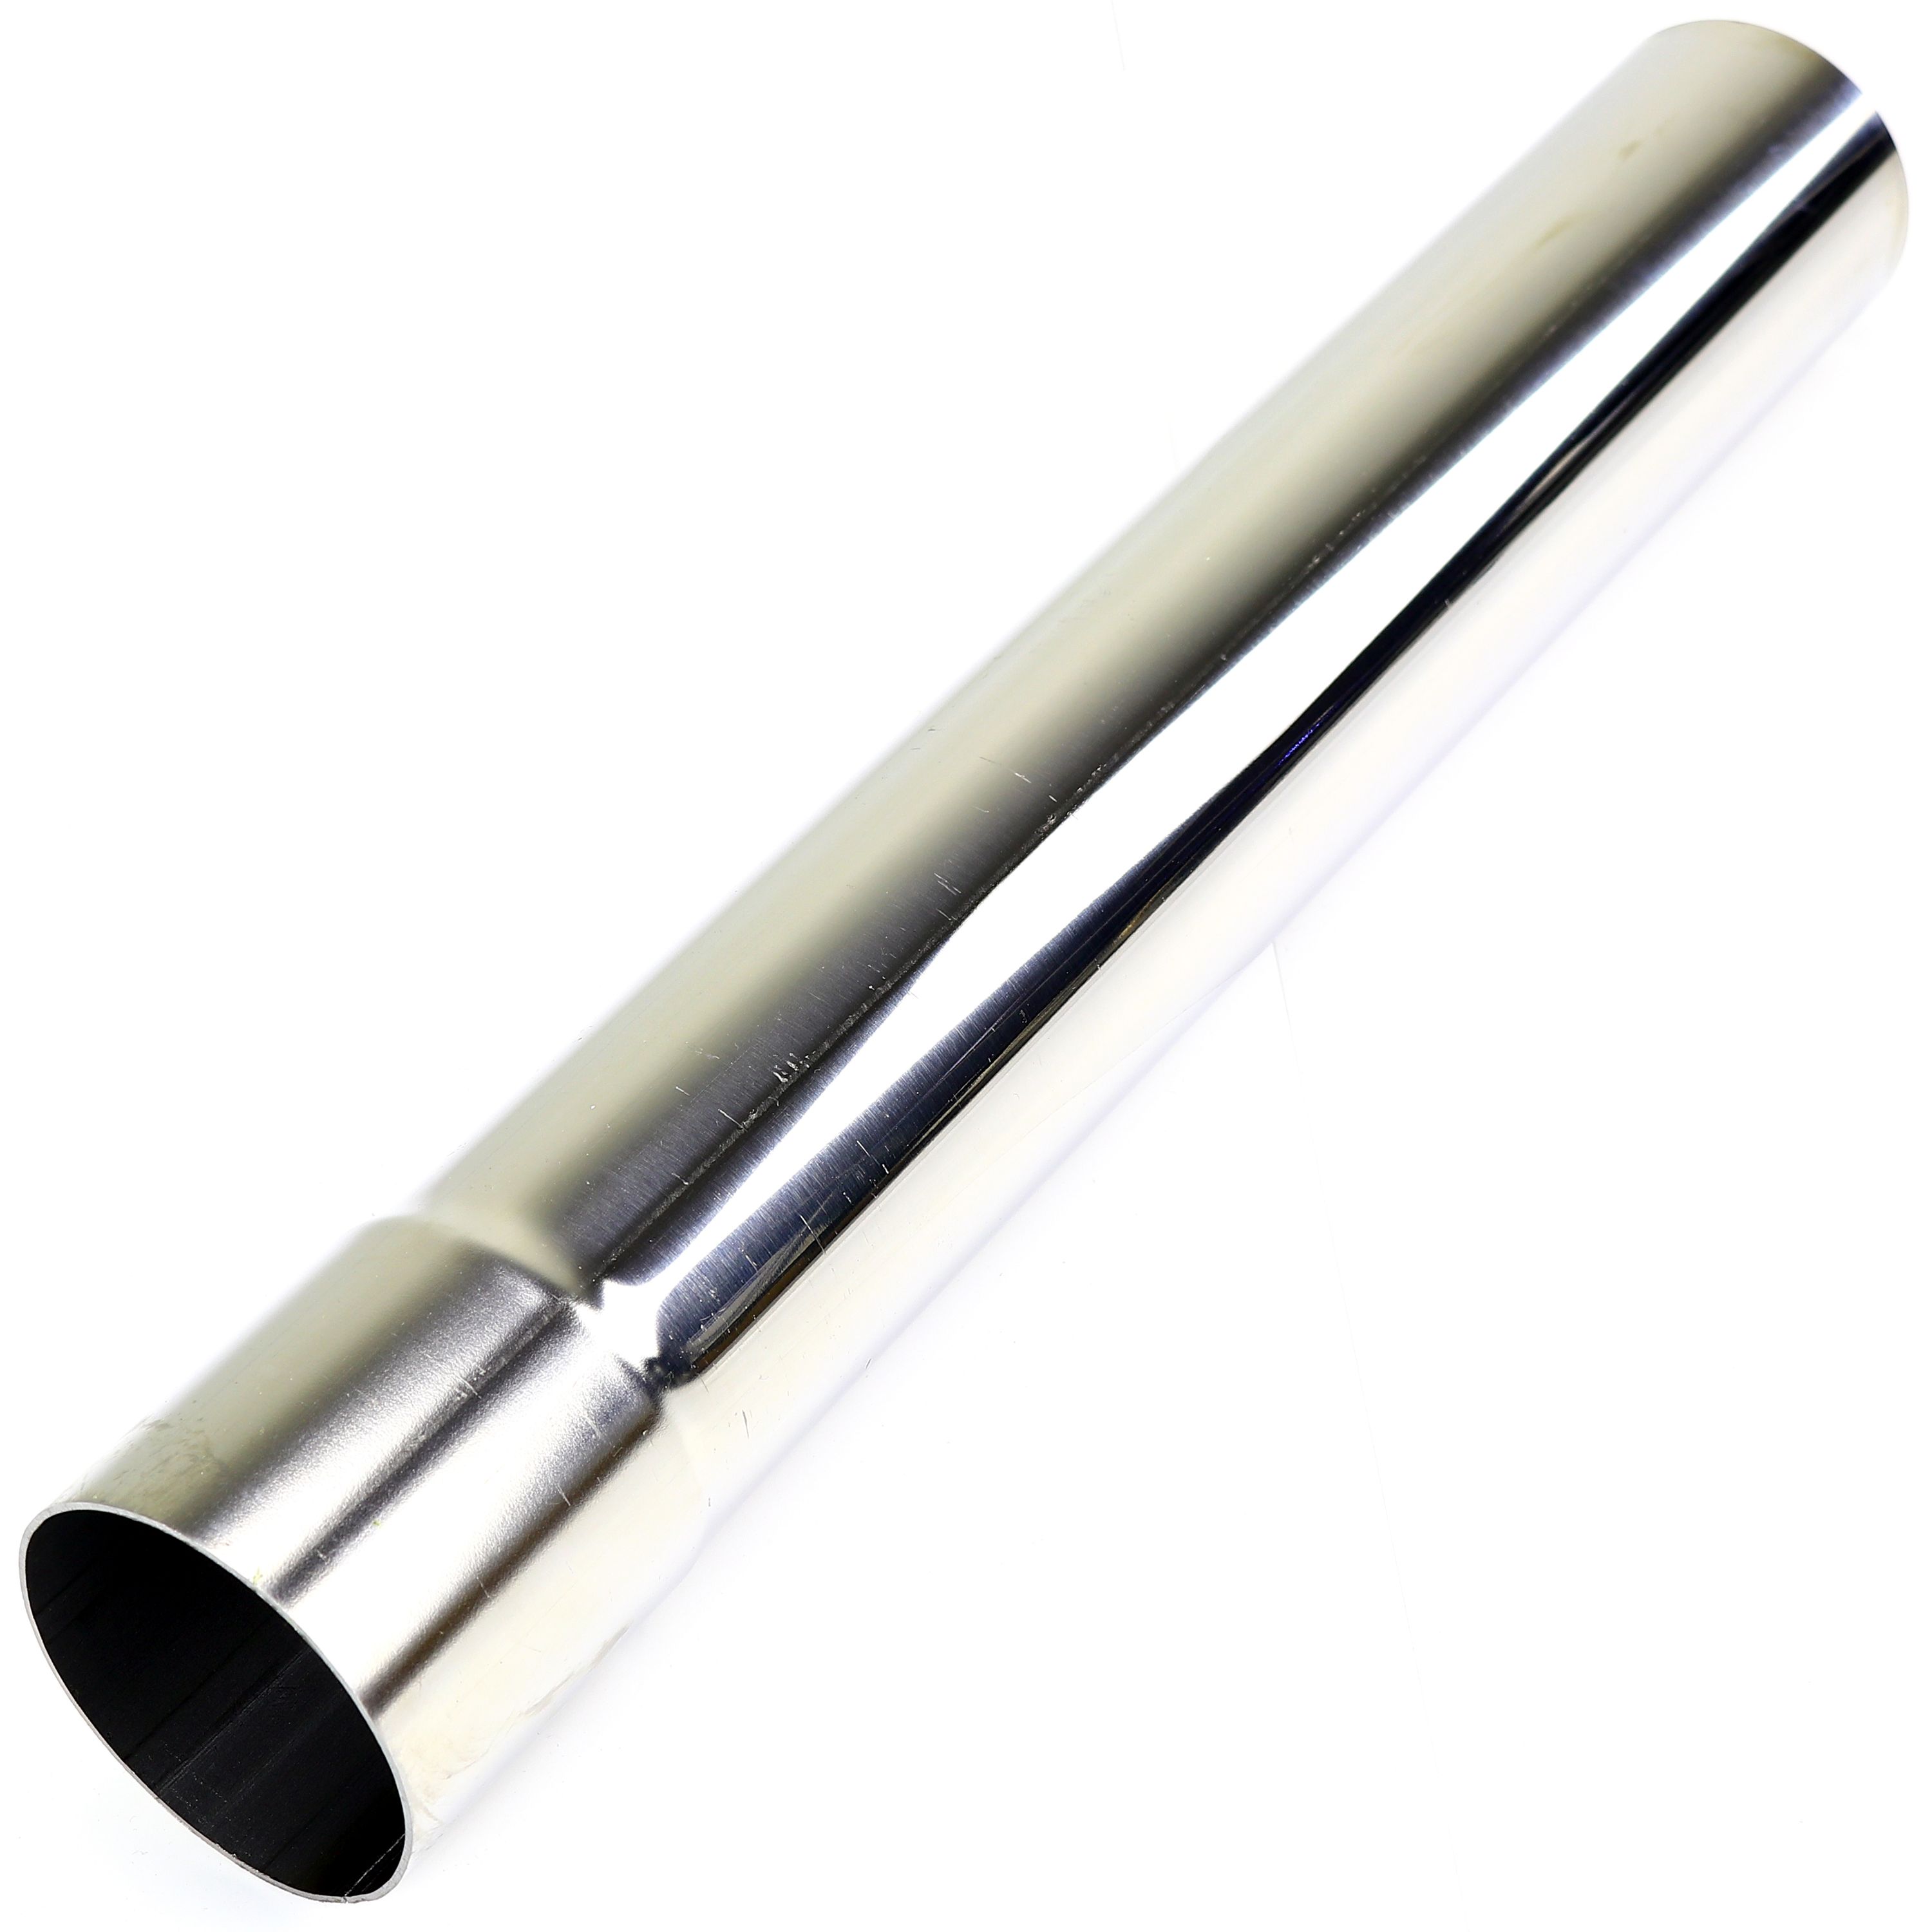 TOTALFLOW 20-304-500-151 Straight Slip On 20 Inch Diesel Exhaust Pipe|5  Inch - ID|5 Inch - OD